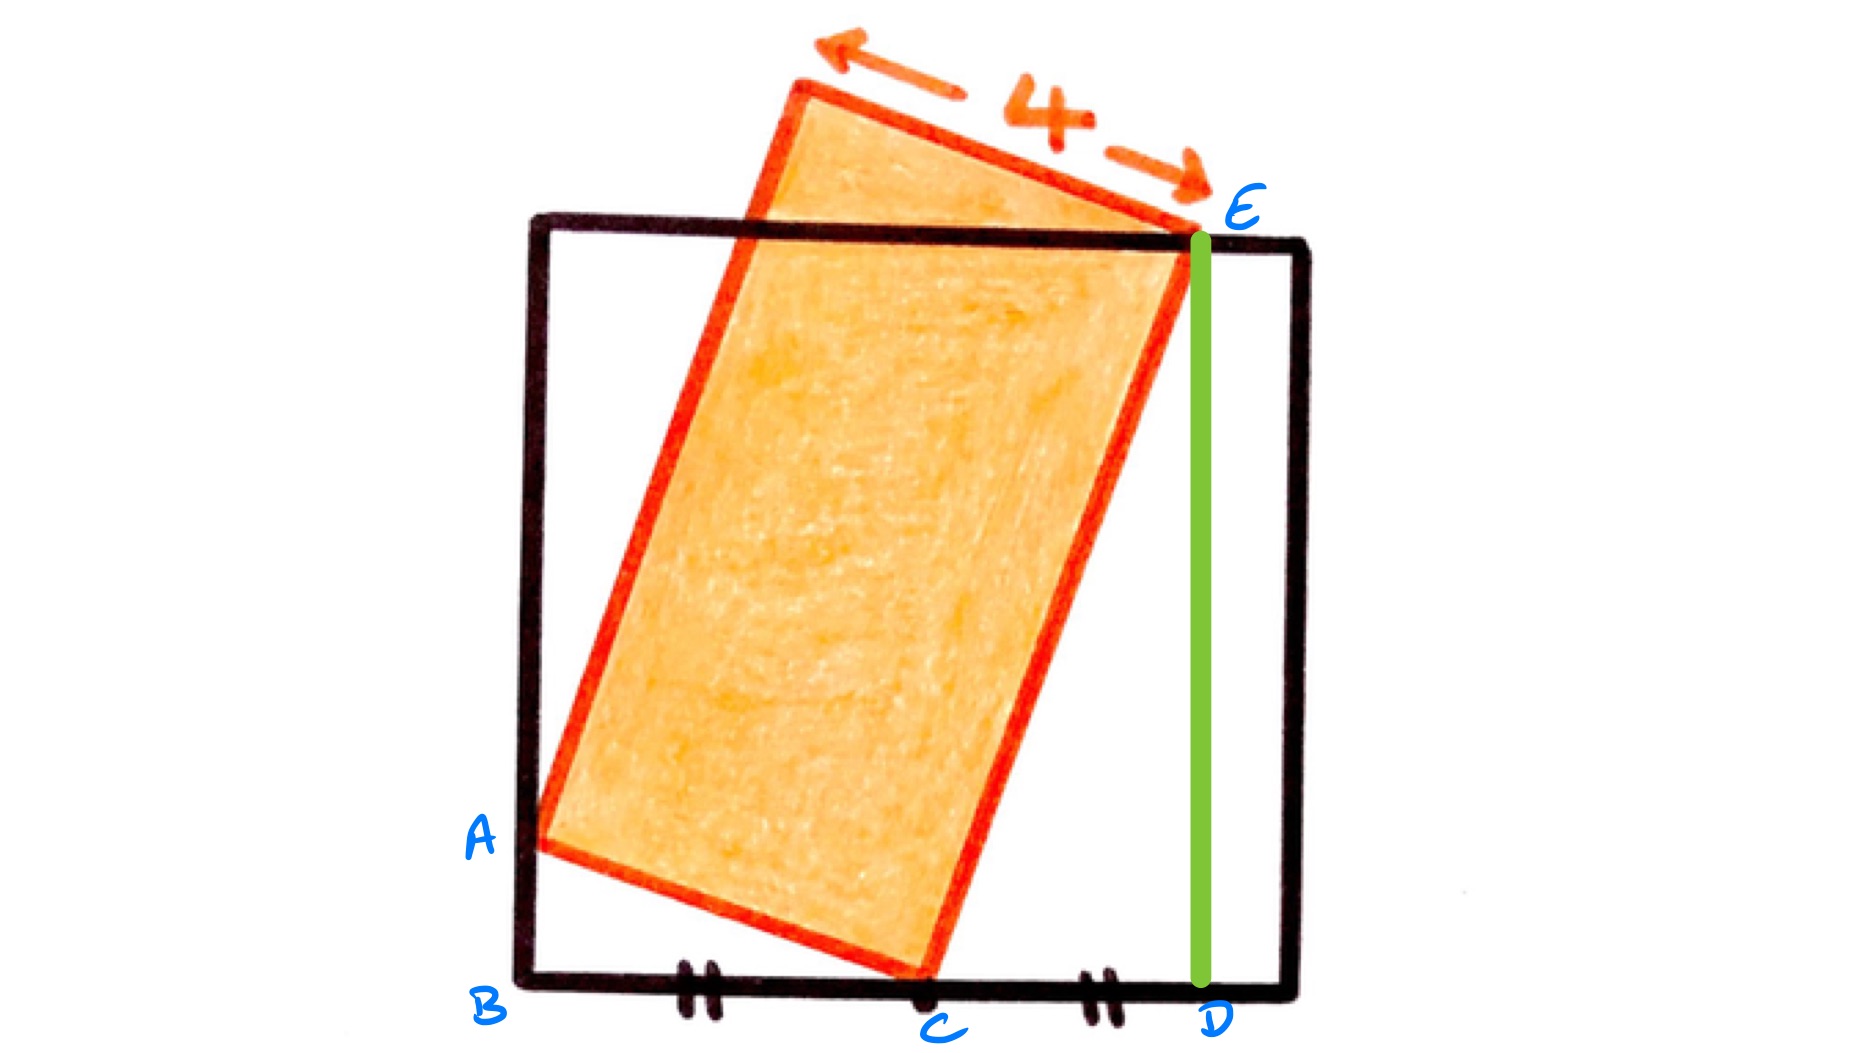 Rectangle tilted over a square labelled